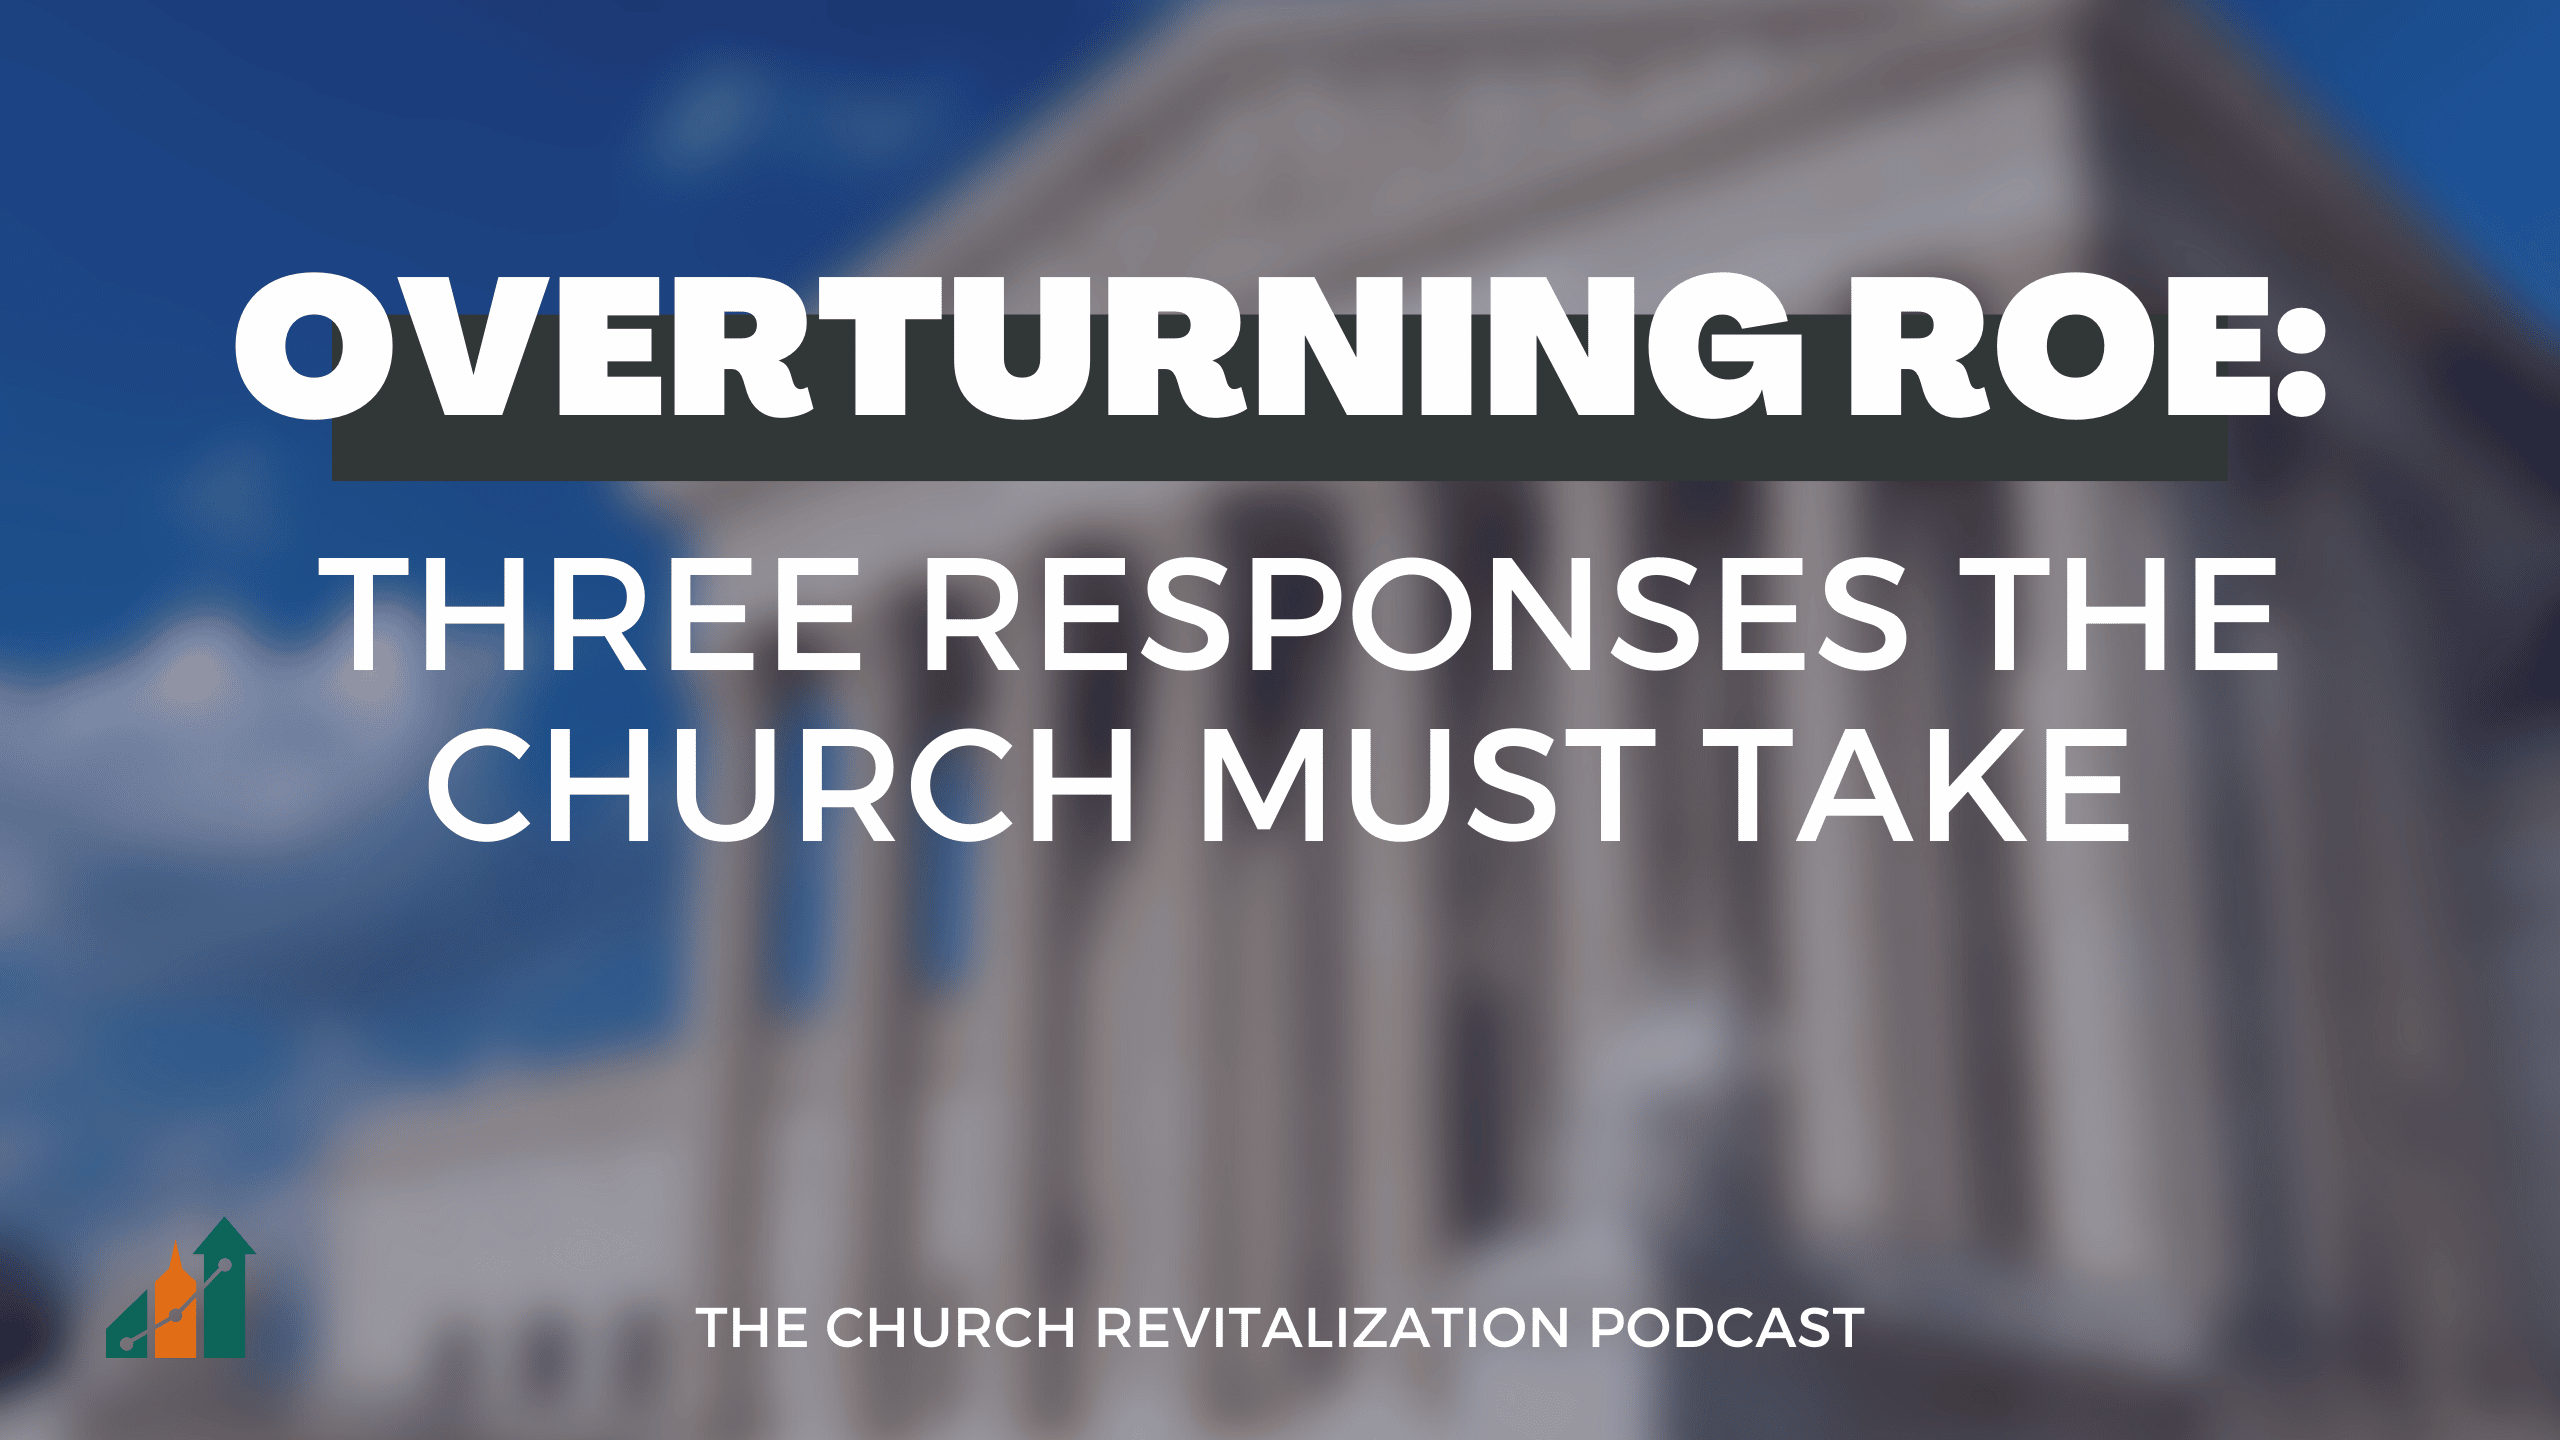 Overturning Roe: Three Responses the Church Must Take